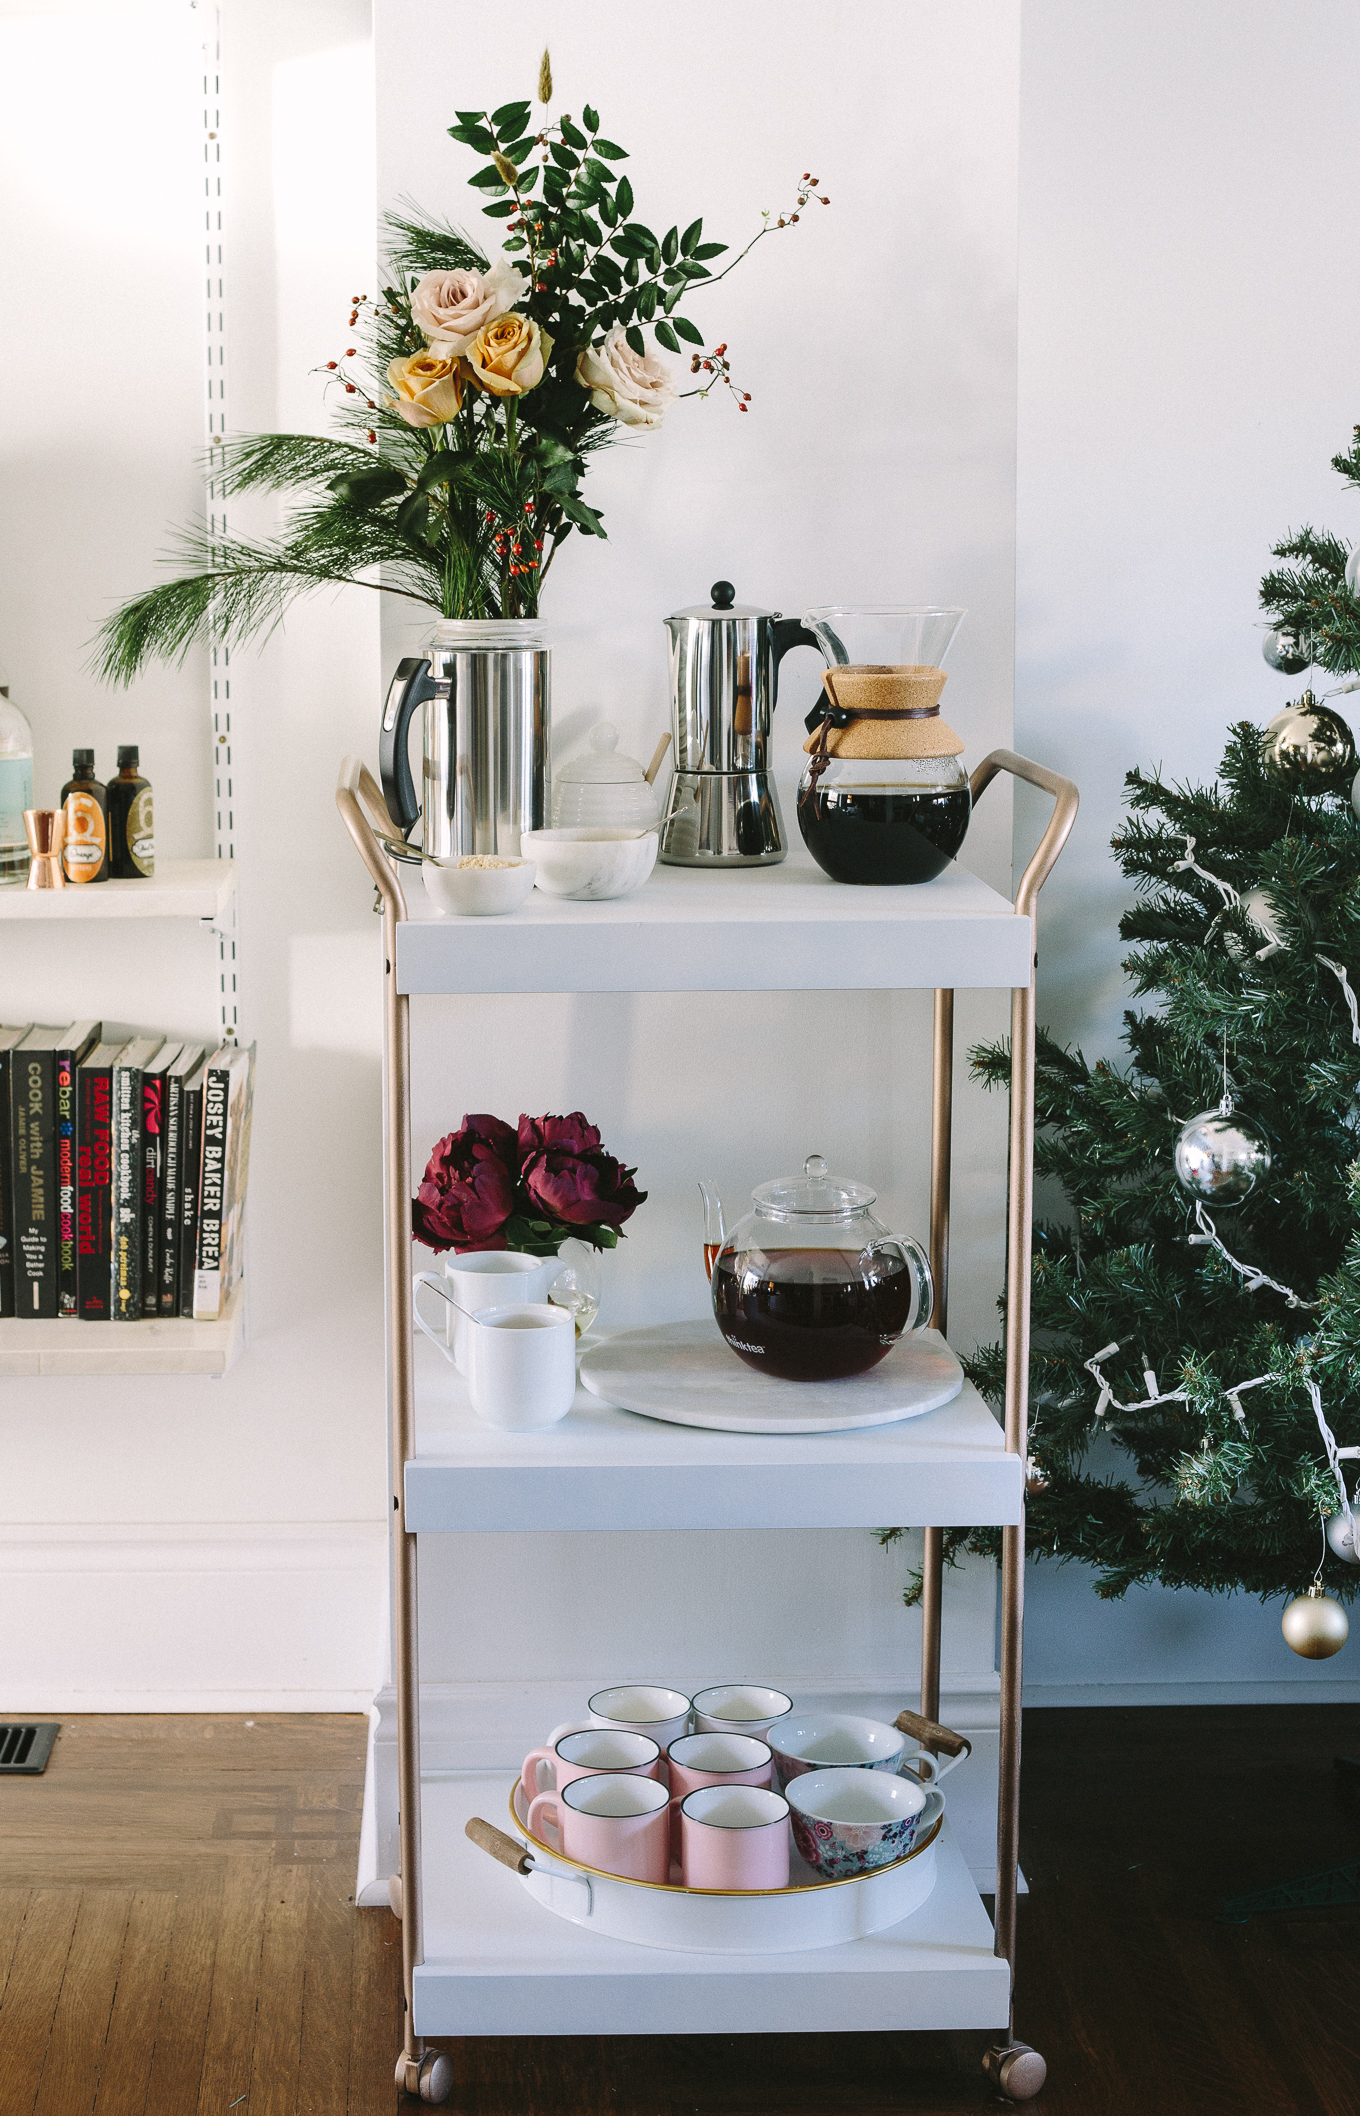 How to Build an Epic Coffee and Tea Bar (+ a Biscotti Christmas